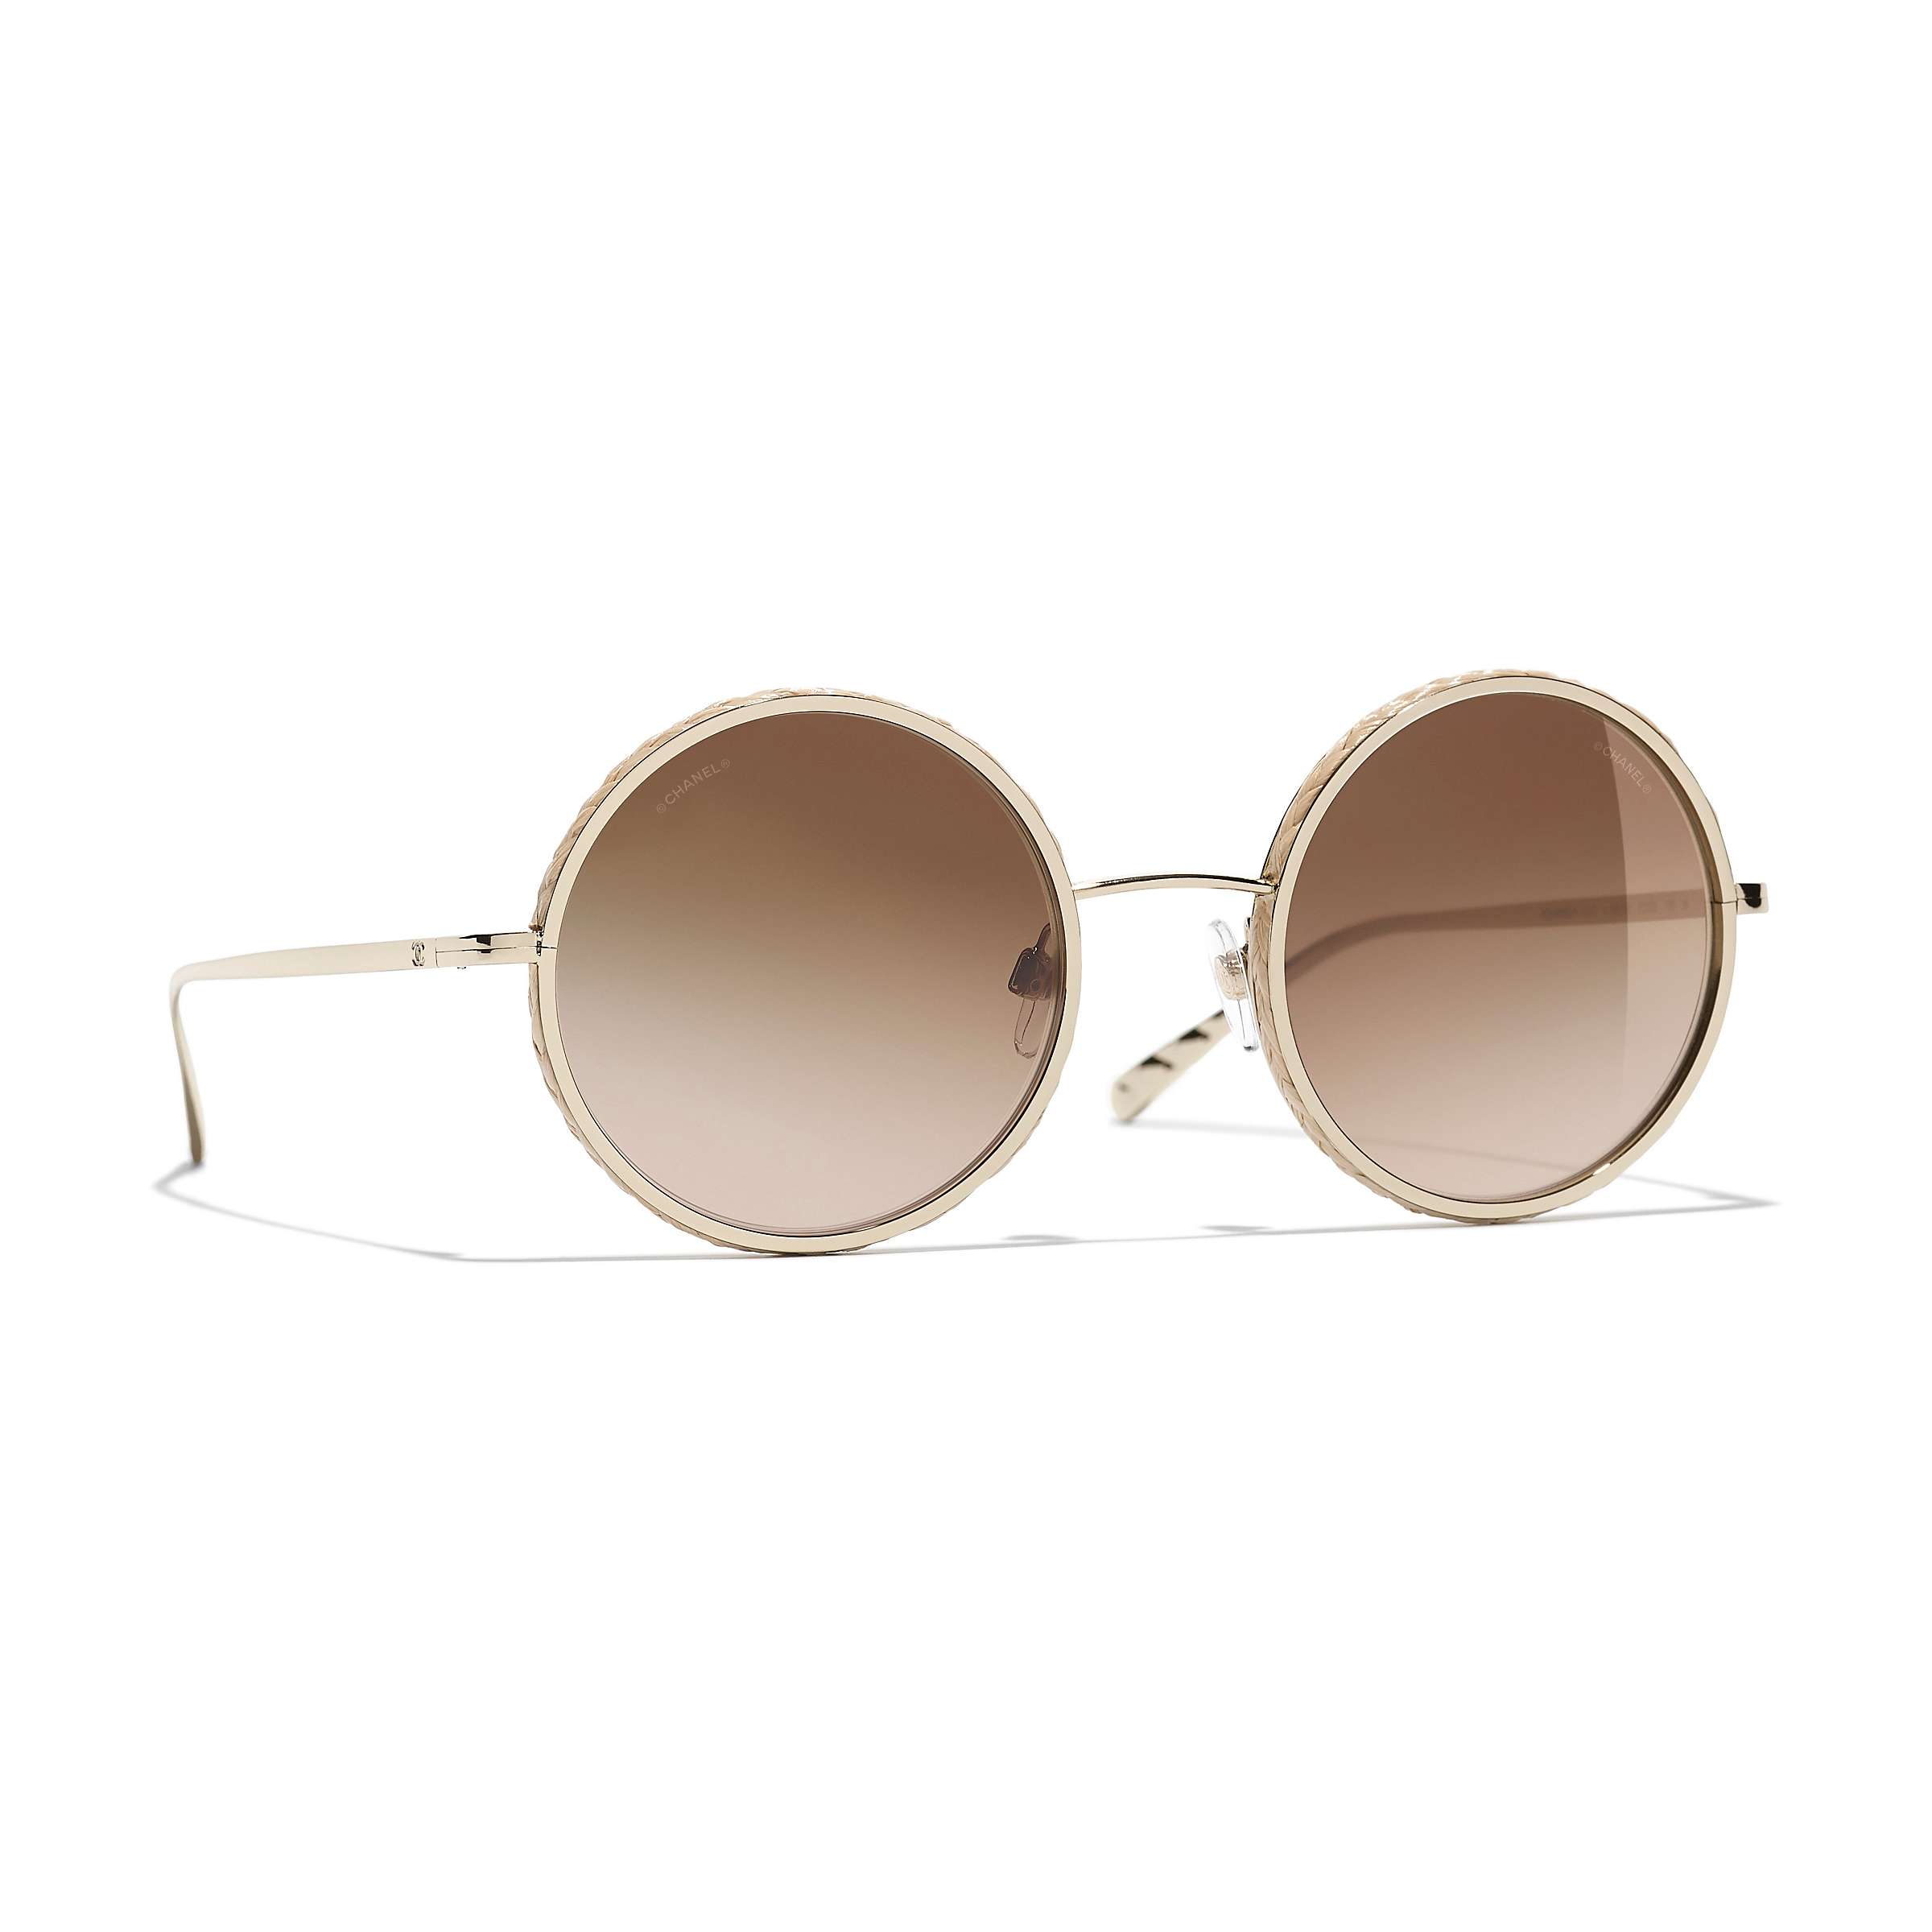 Buy CHANEL Round Sunglasses CH4250 Gold/Brown Gradient Online at johnlewis.com